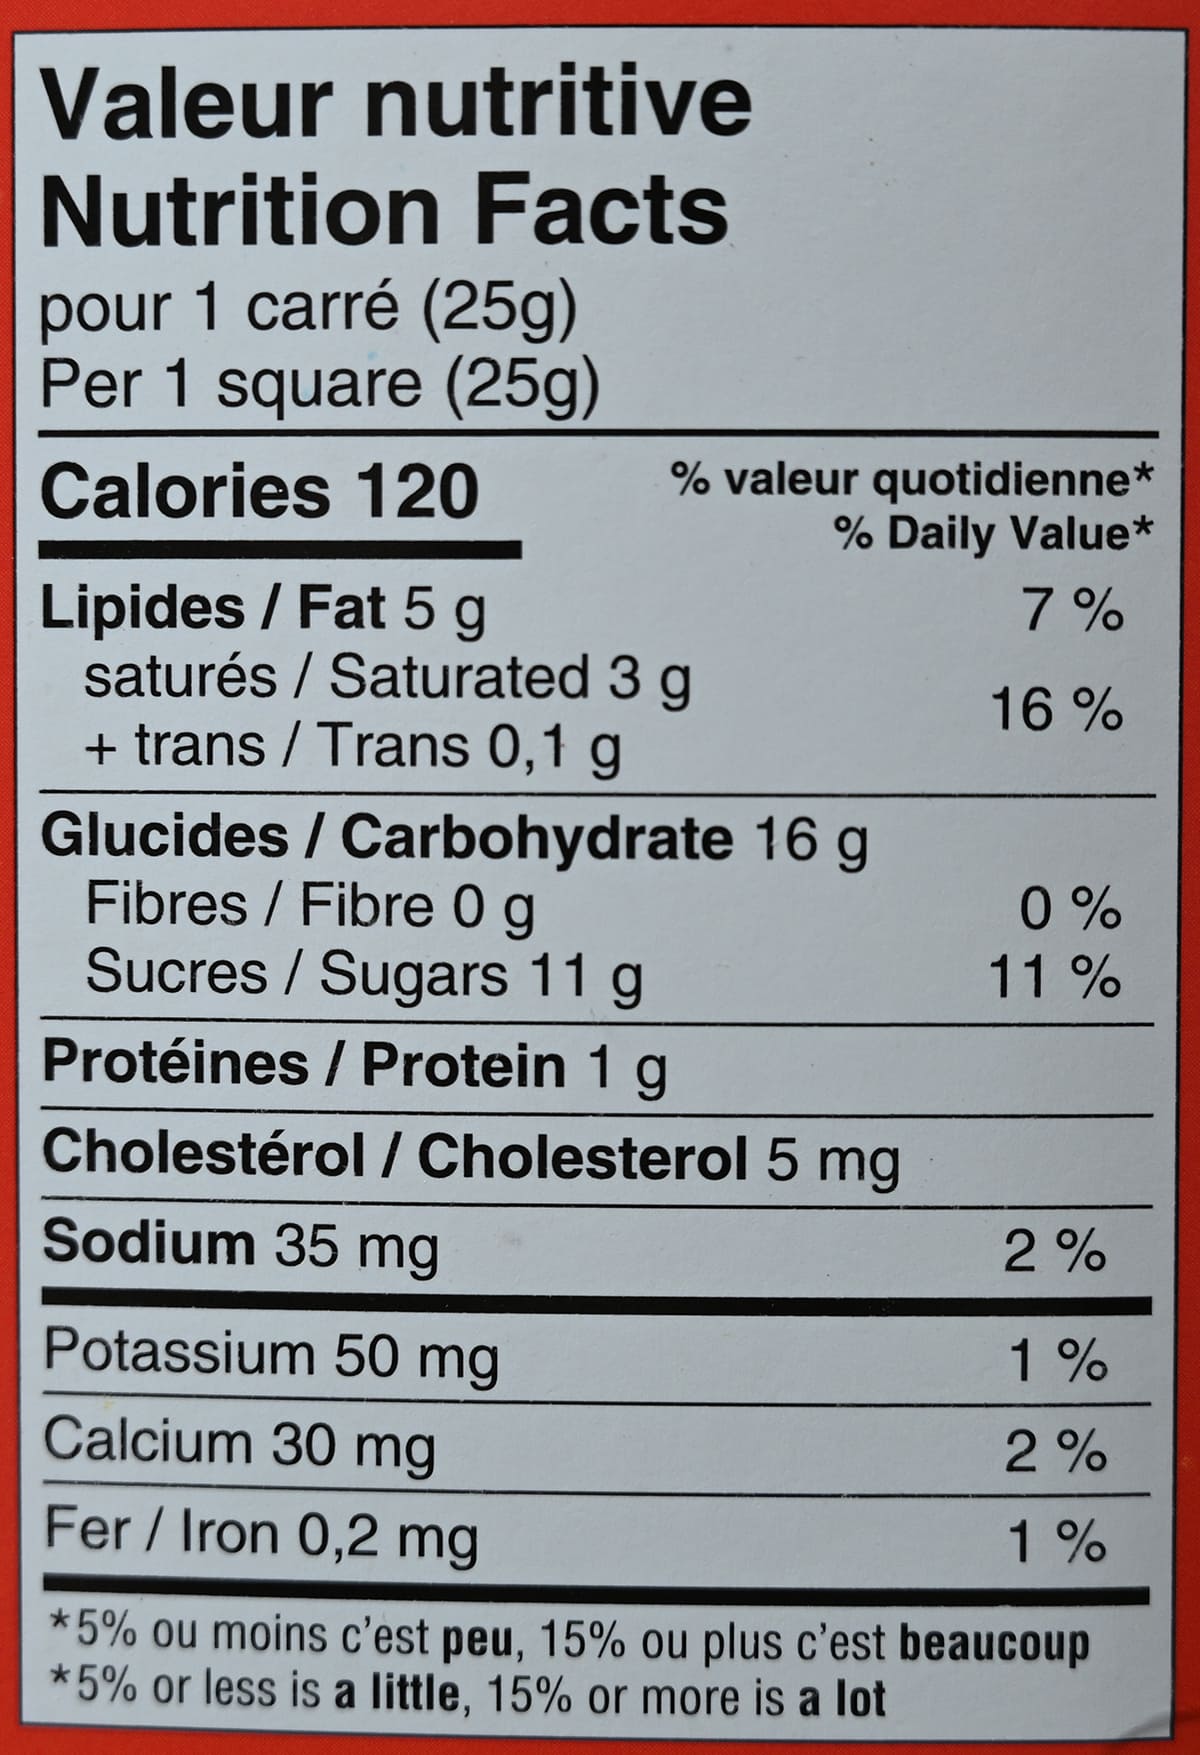 Image of the Crispeez Nutrition Facts from the back of the box.